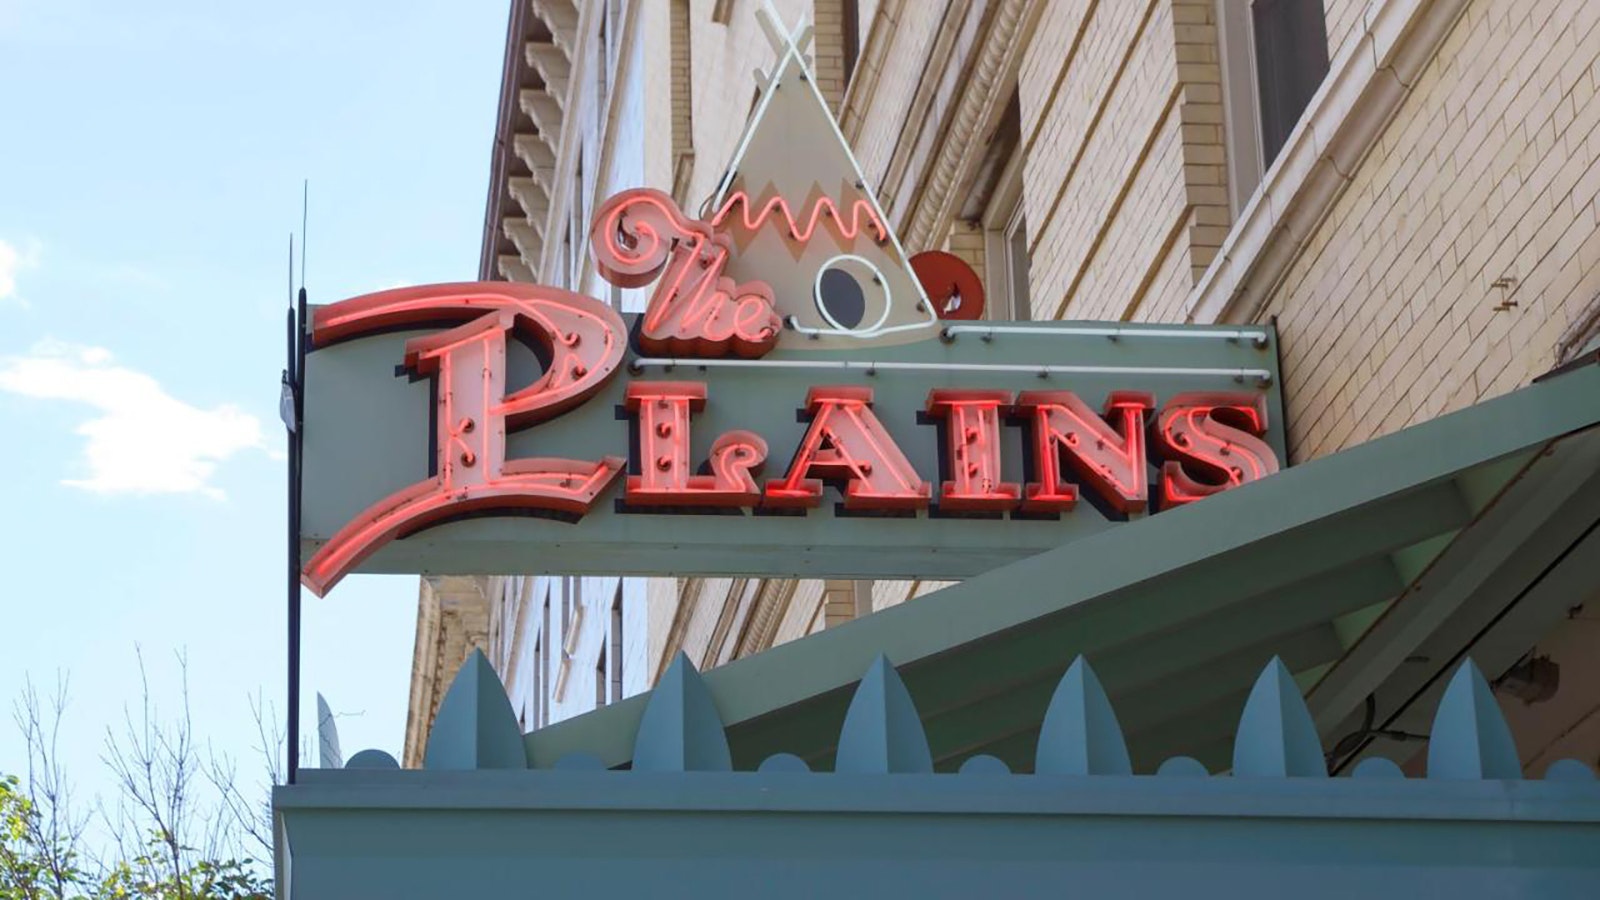 One of the hotel's historic neon signs.